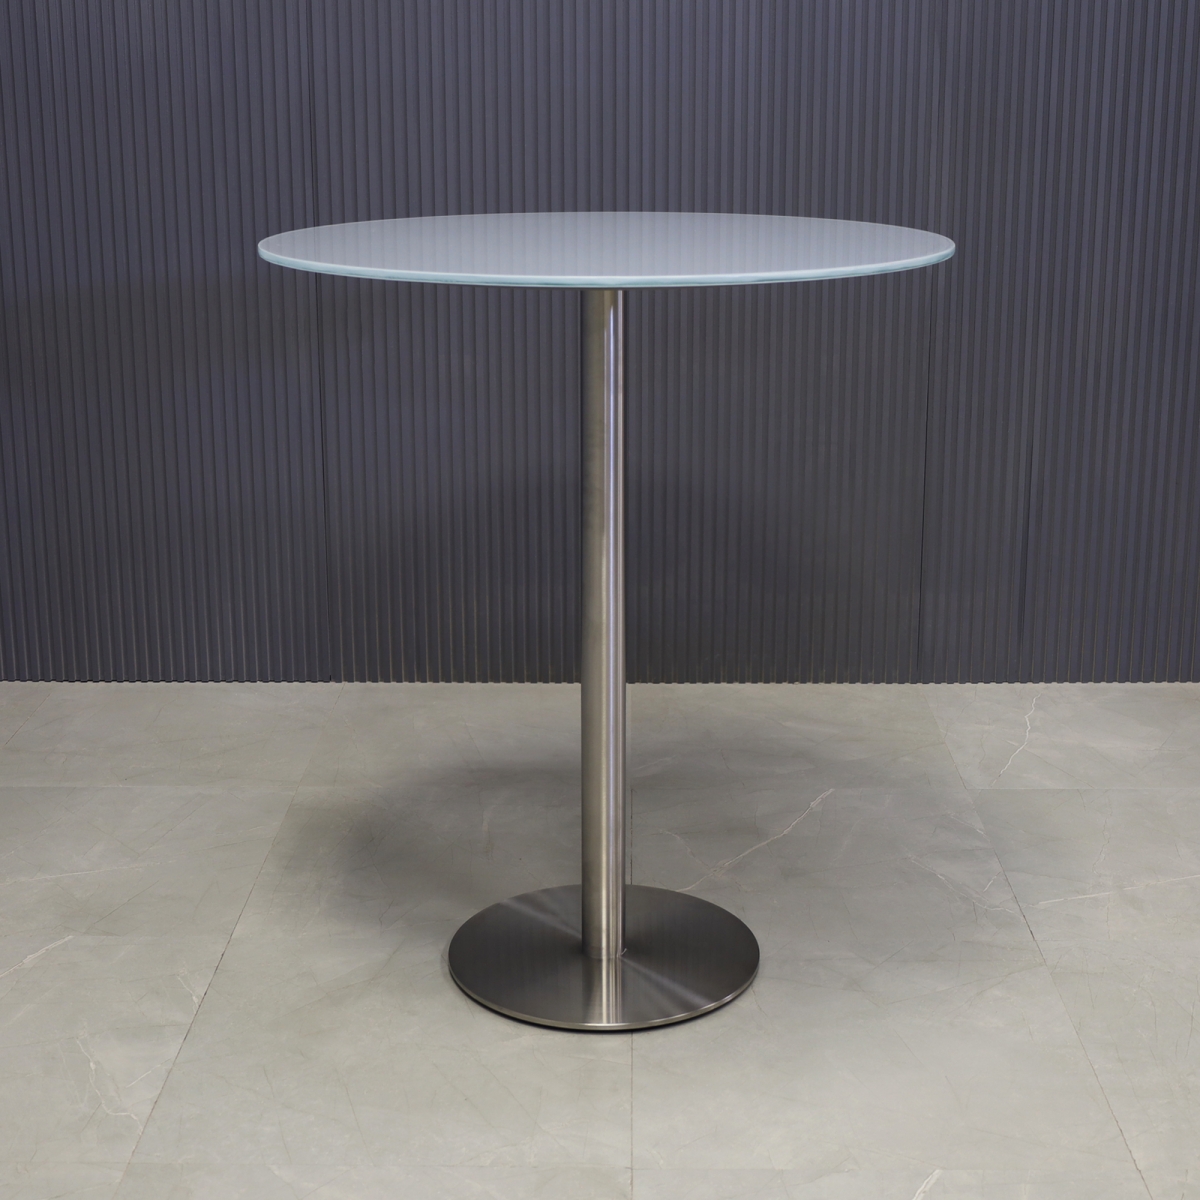 California Round Tempered Glass Bar Table